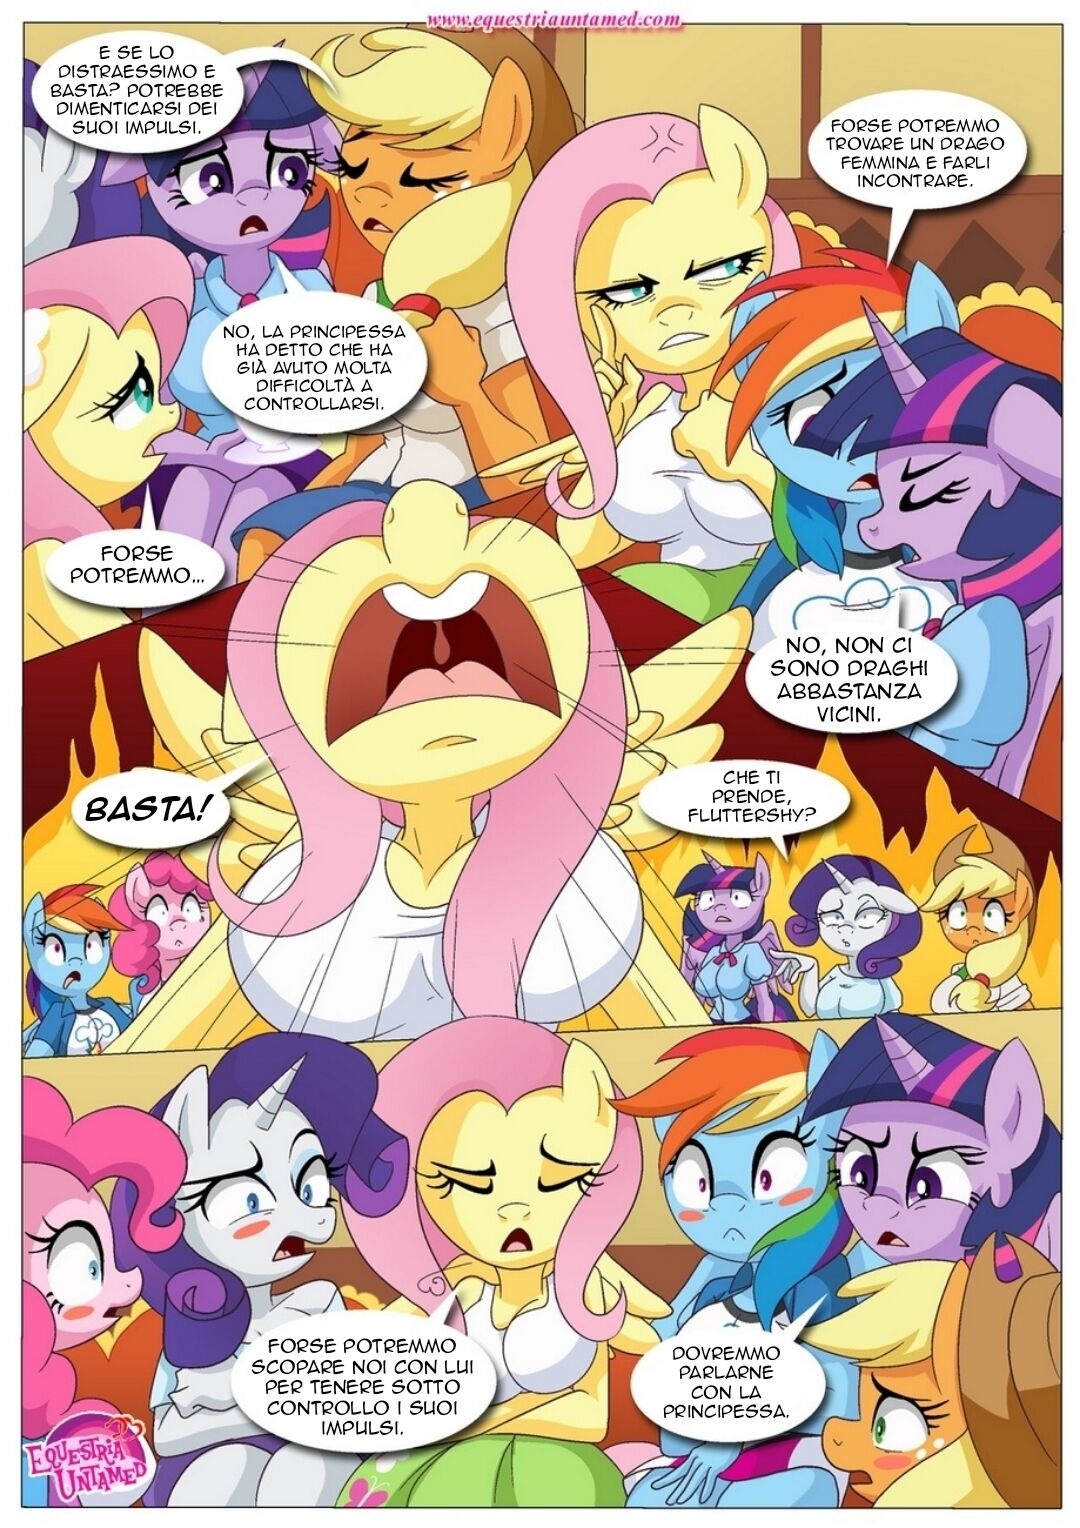 [Palcomix] The Power Of Dragon Mating (My Little Pony Friendship Is Magic) (italian) 18